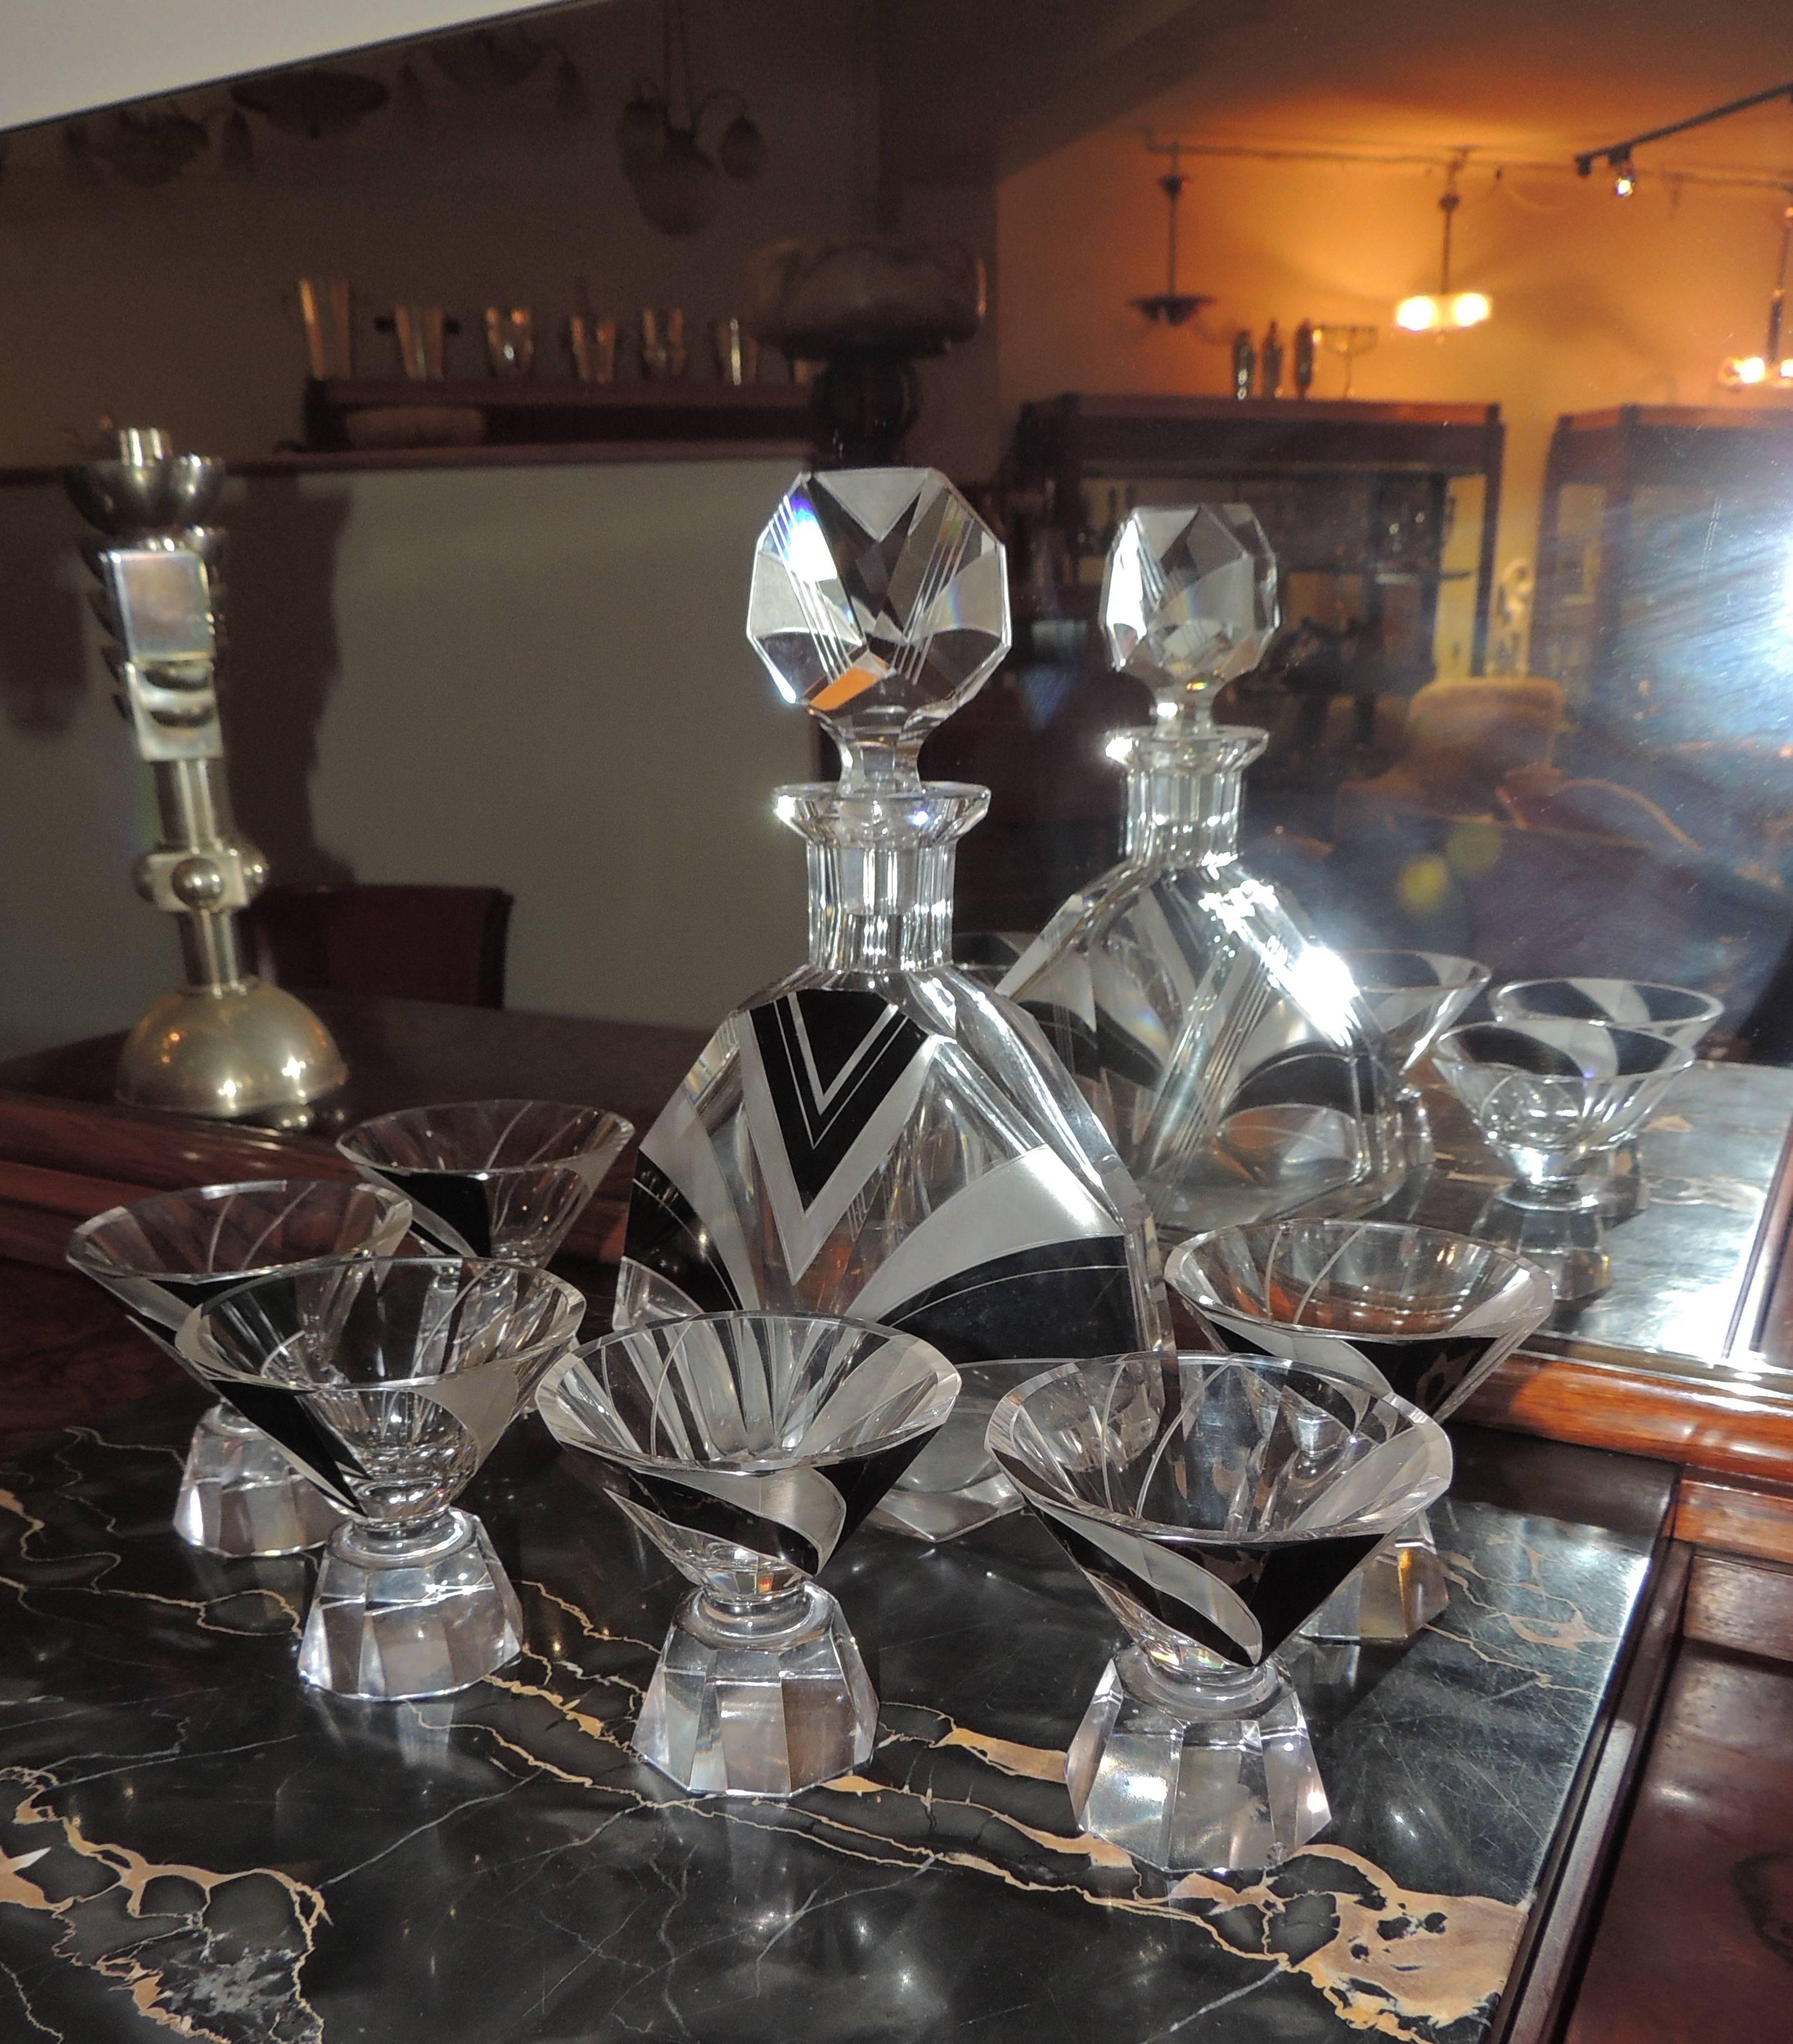 Classic Art Deco Czech glass decanter with matching stopper and six glasses on graceful bases perfectly embodies all the elements of style from the era.

When a client asks “I have to buy a gift for someone who loves Art Deco – what do you